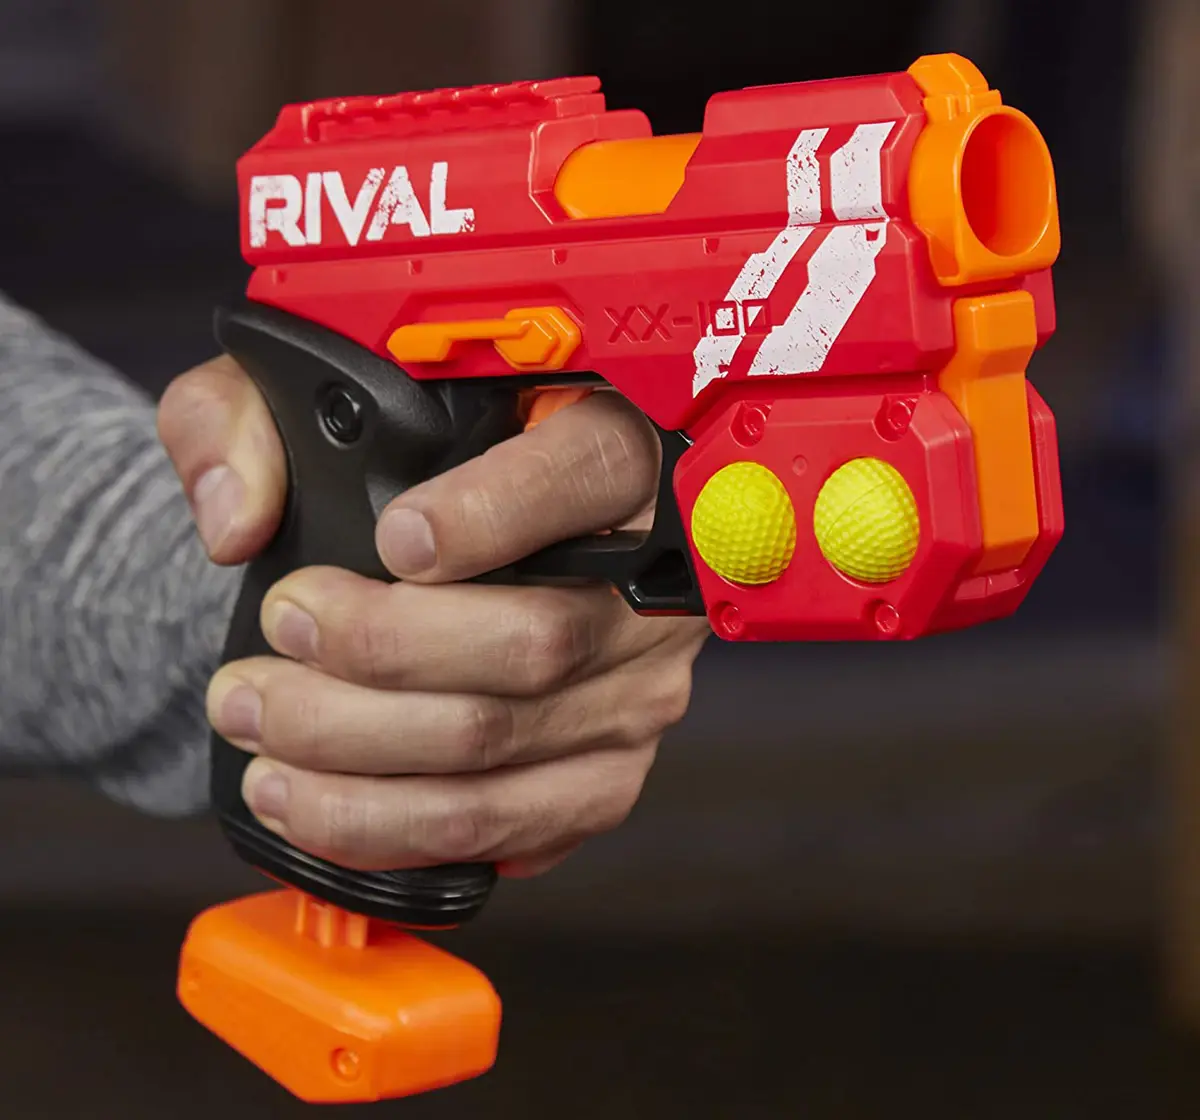 Nerf Rival Knockout XX-100 Blaster Toy Gun  -- Round Storage, 90 FPS Velocity, Breech Load  -- Includes 2 Official Nerf Rival Rounds -- Team Red Blasters for Kids age 14Y+, Assorted